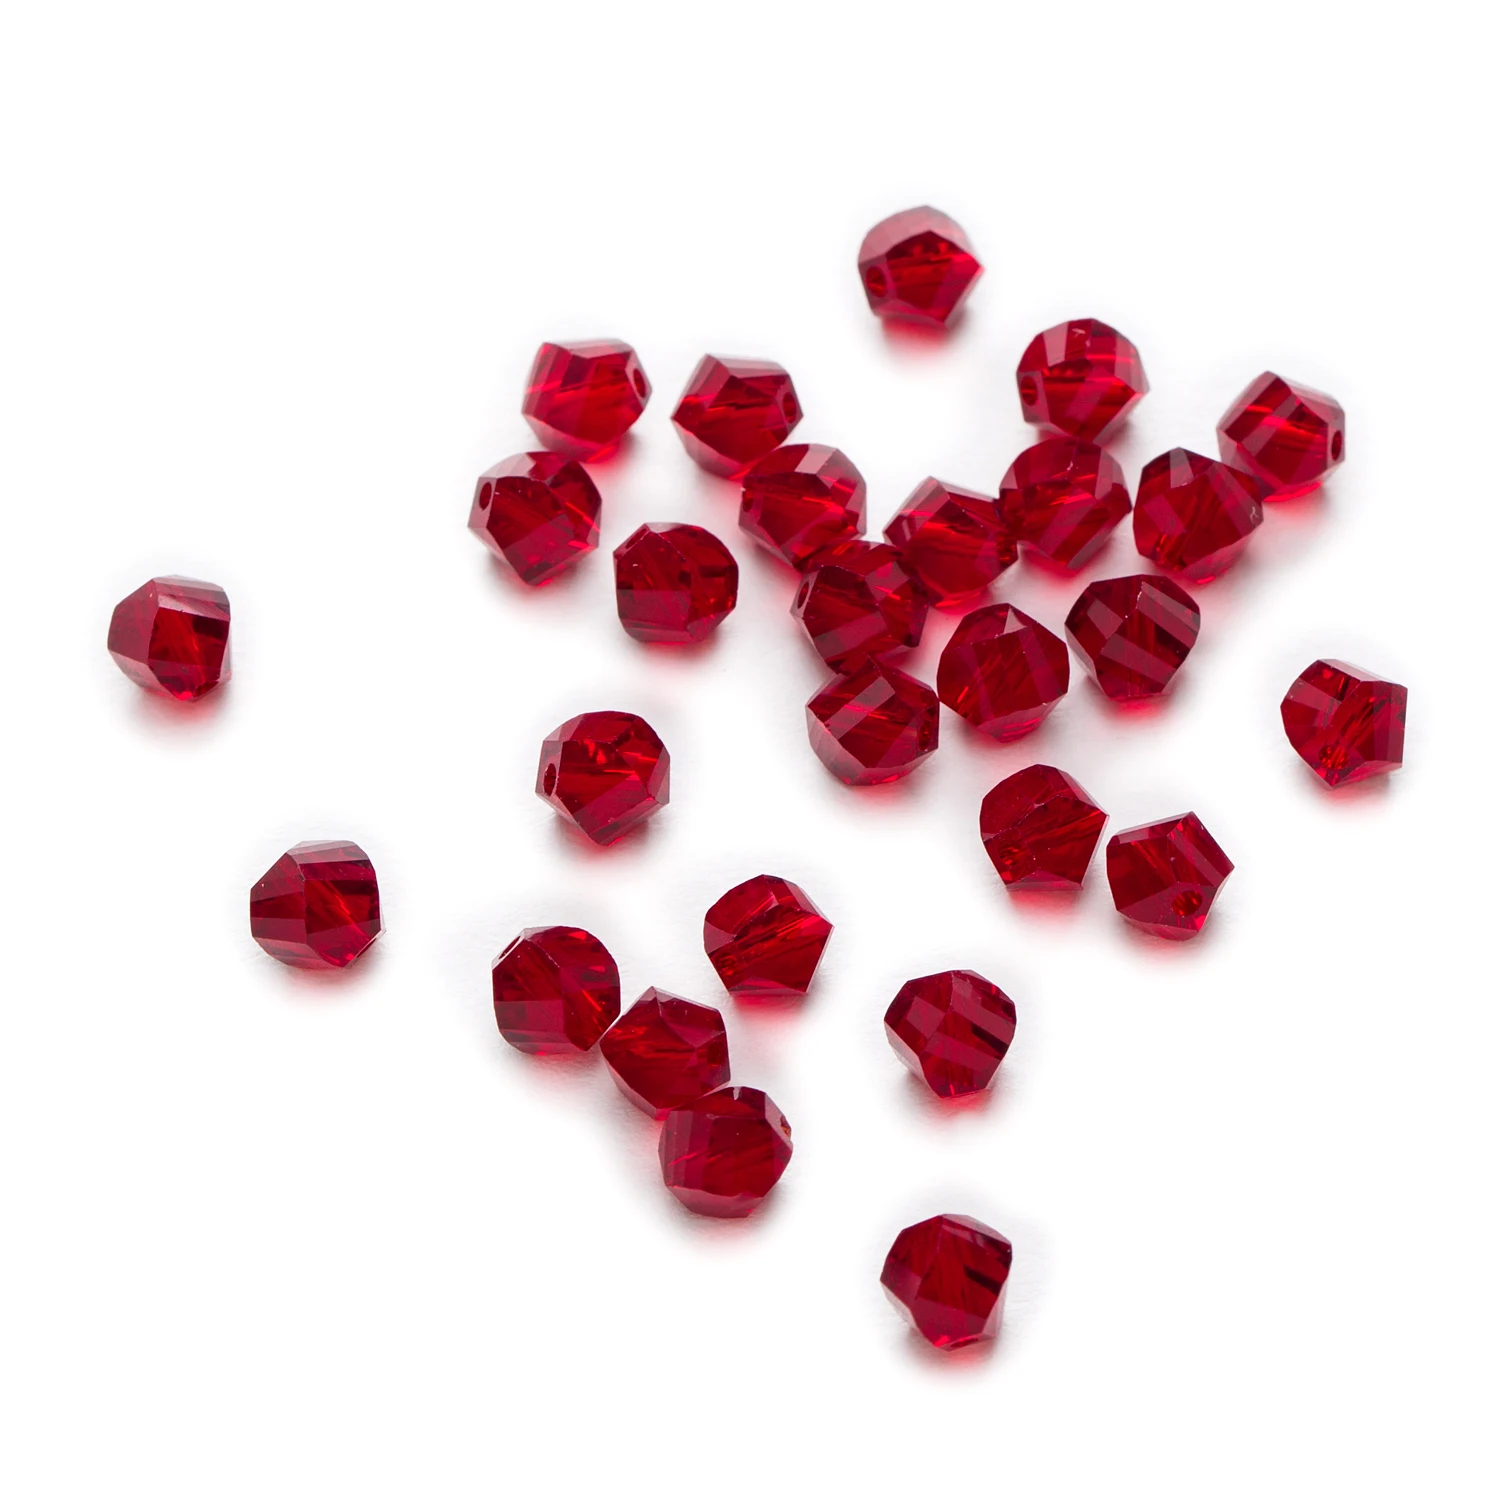 

50 Piece Dark Red Twisted Cut Faceted Crystal Glass Spacer Beads Jewelry Making For Handmade Bracelet Necklaces DIY 6-10mm